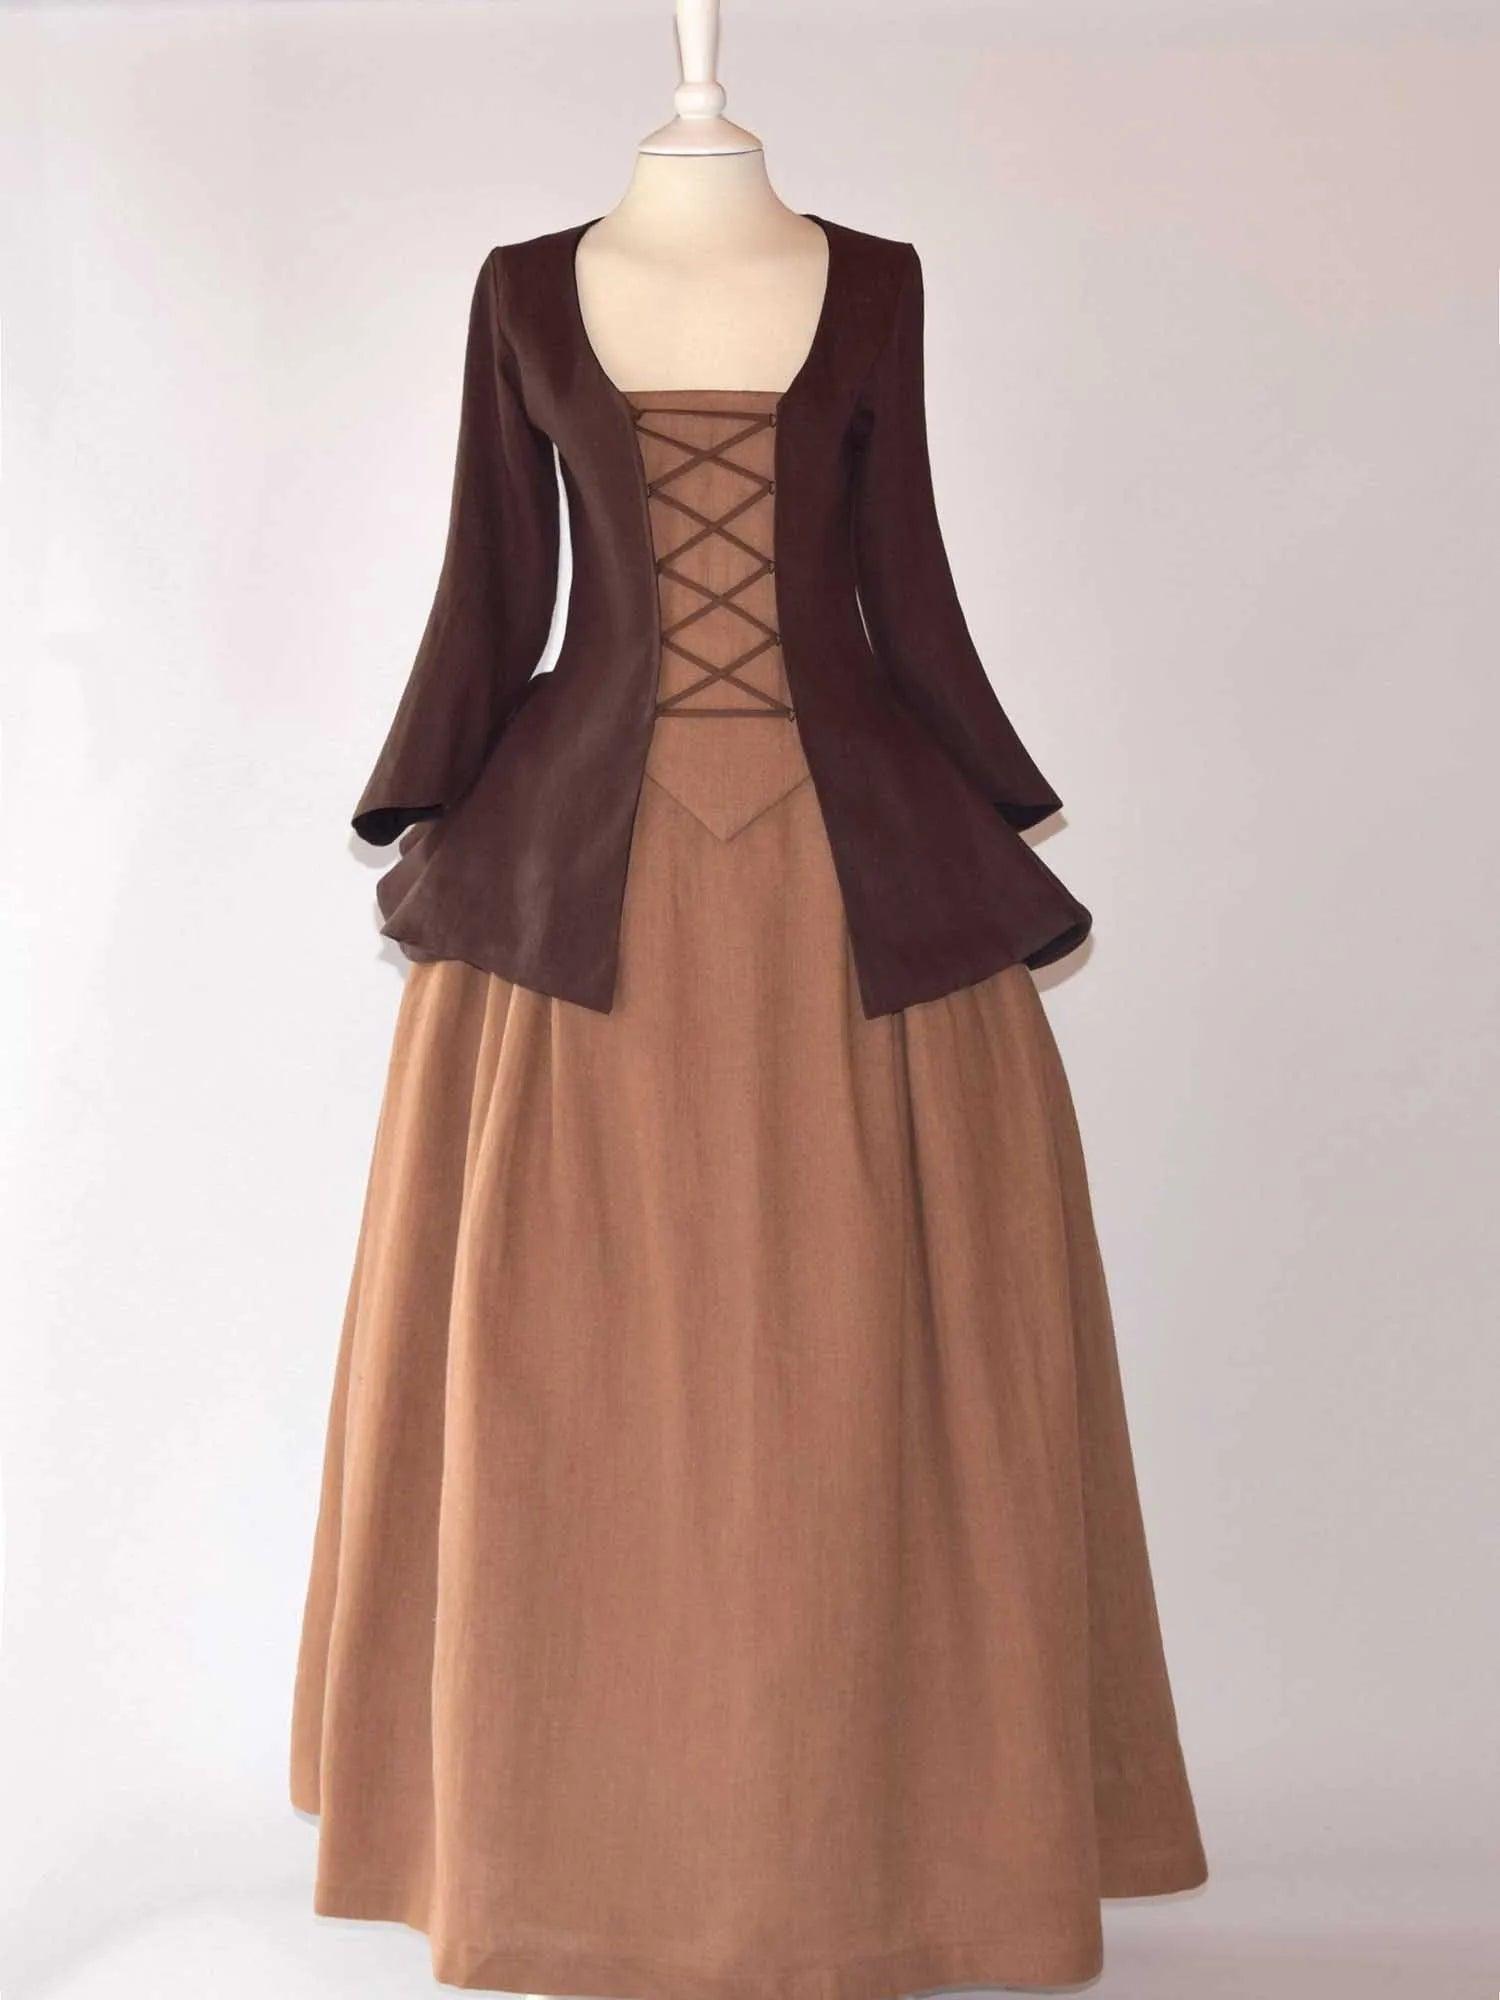 JANET, Colonial Costume in Chocolate &amp; Toffee Linen - Atelier Serraspina